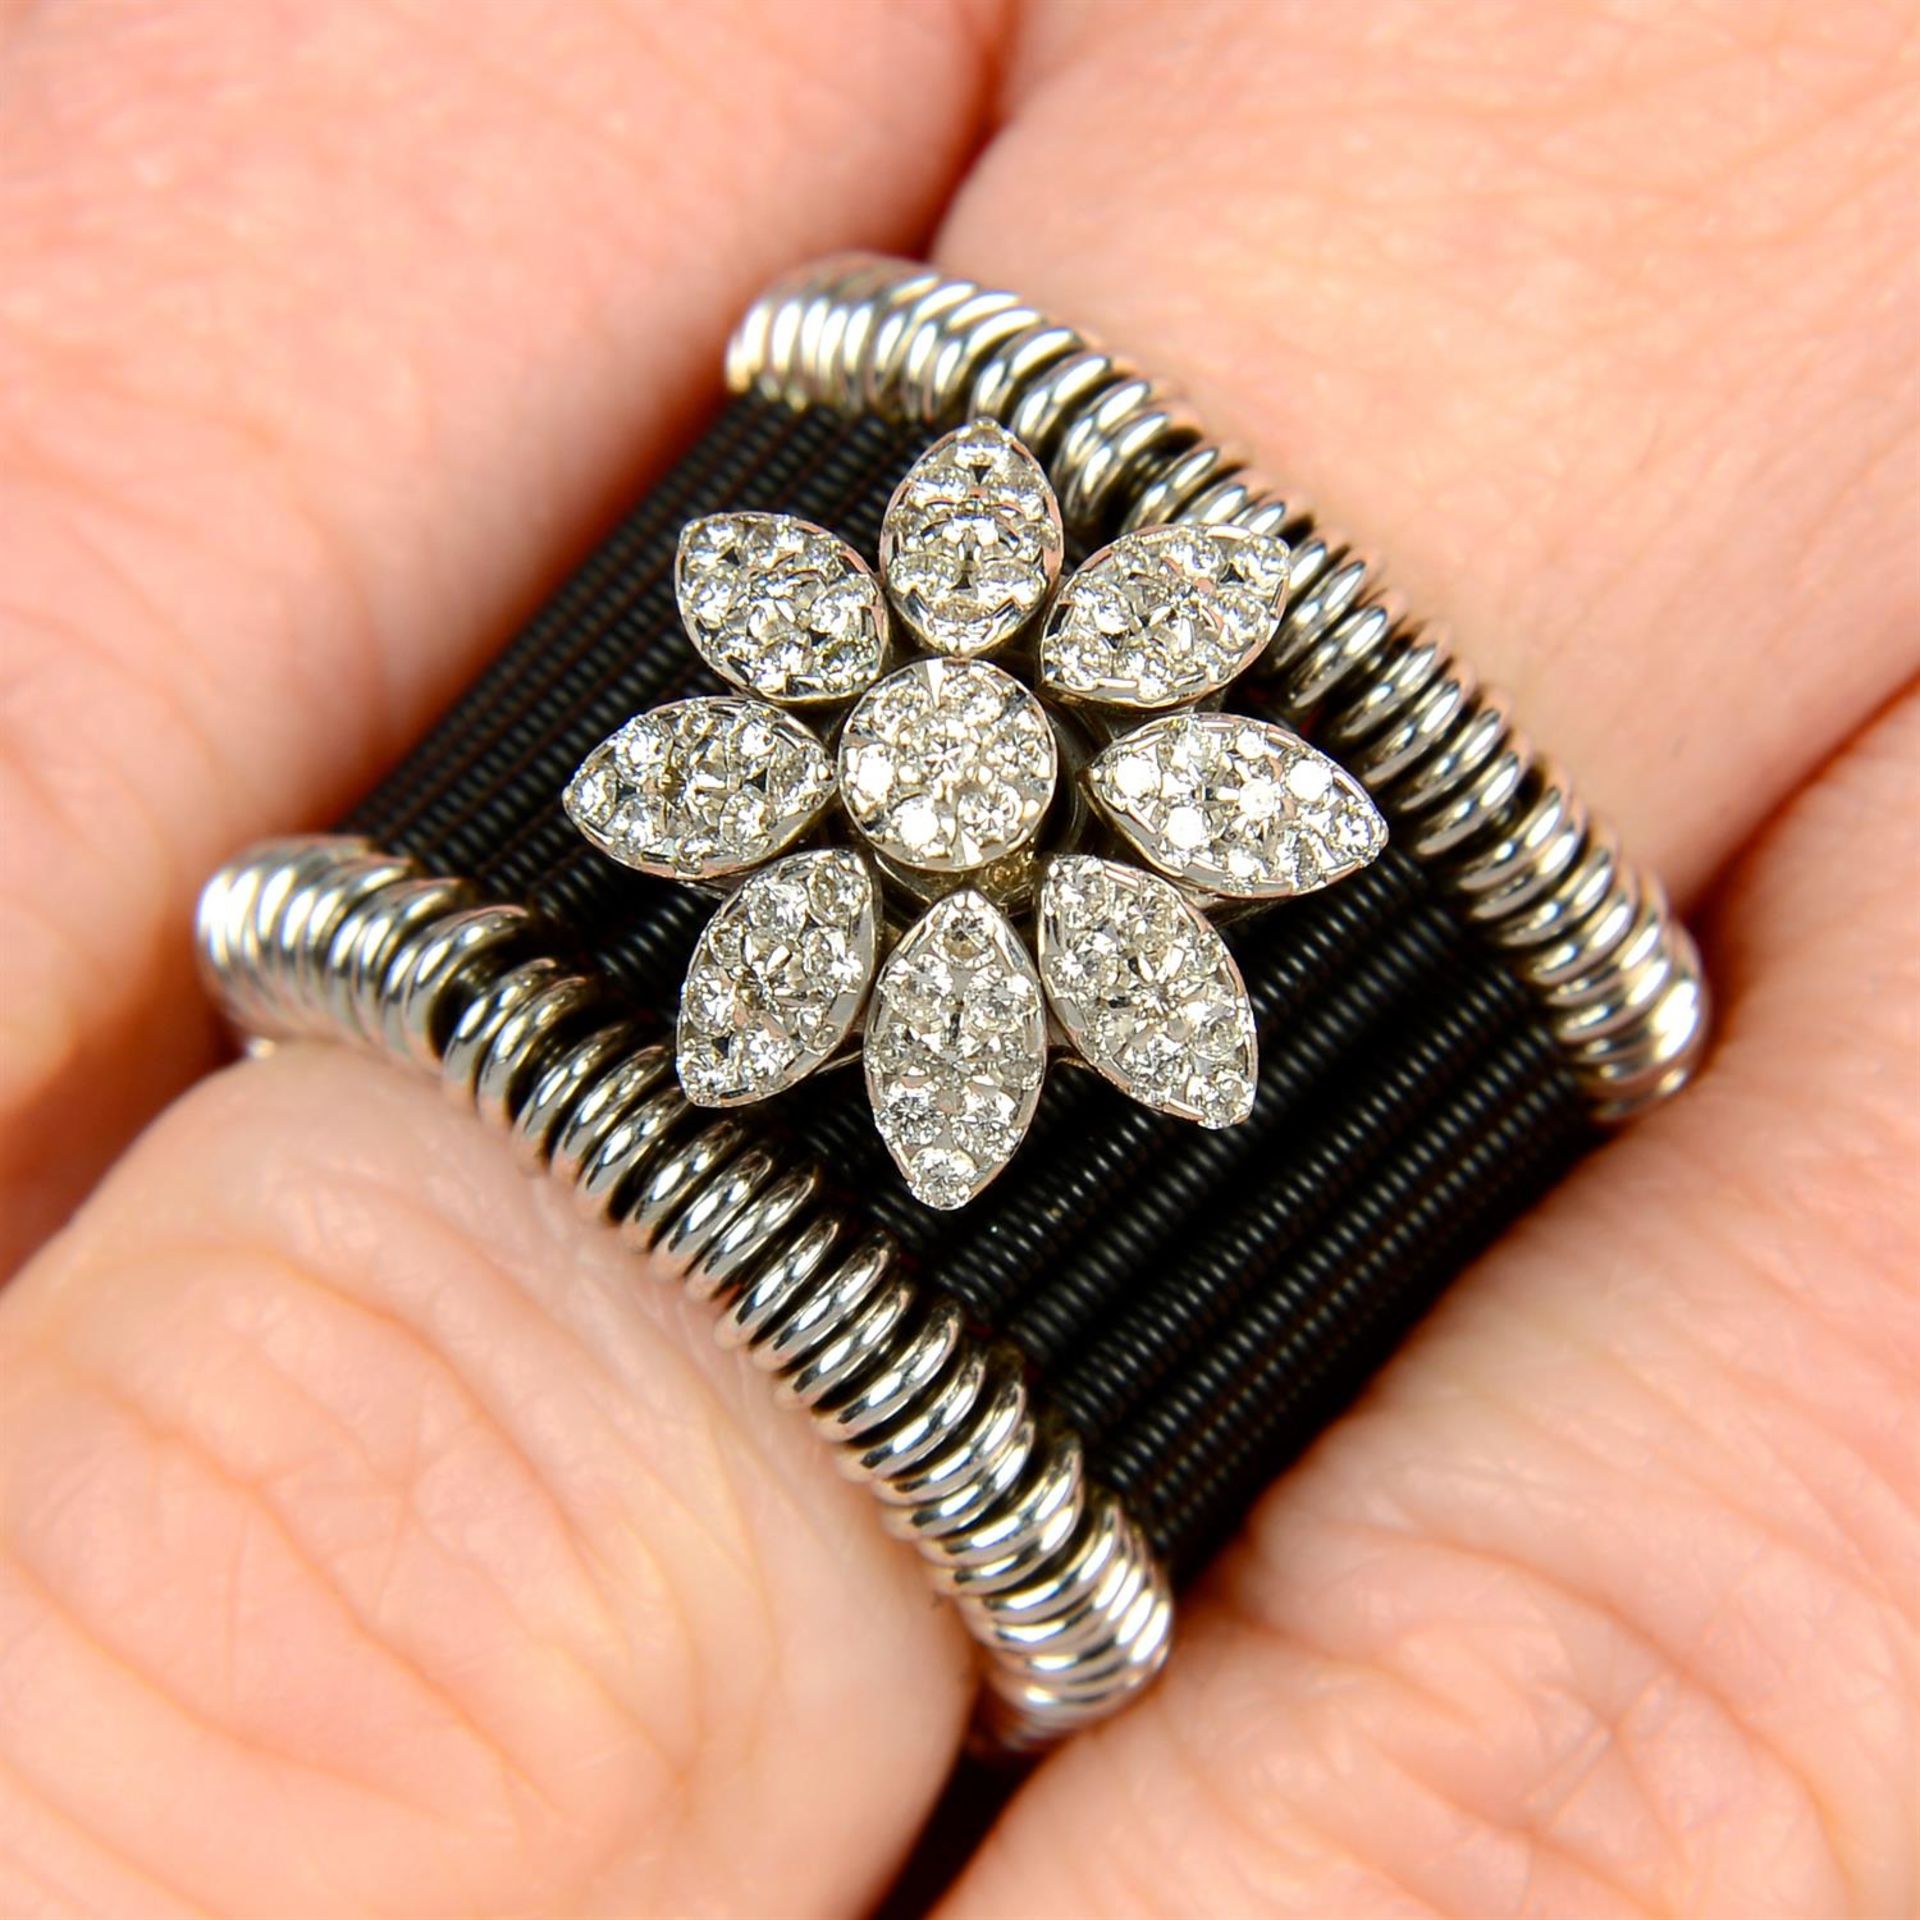 An 18ct gold and black stainless steel 'Shanghai Flower' ring, with brilliant-cut diamond spinning